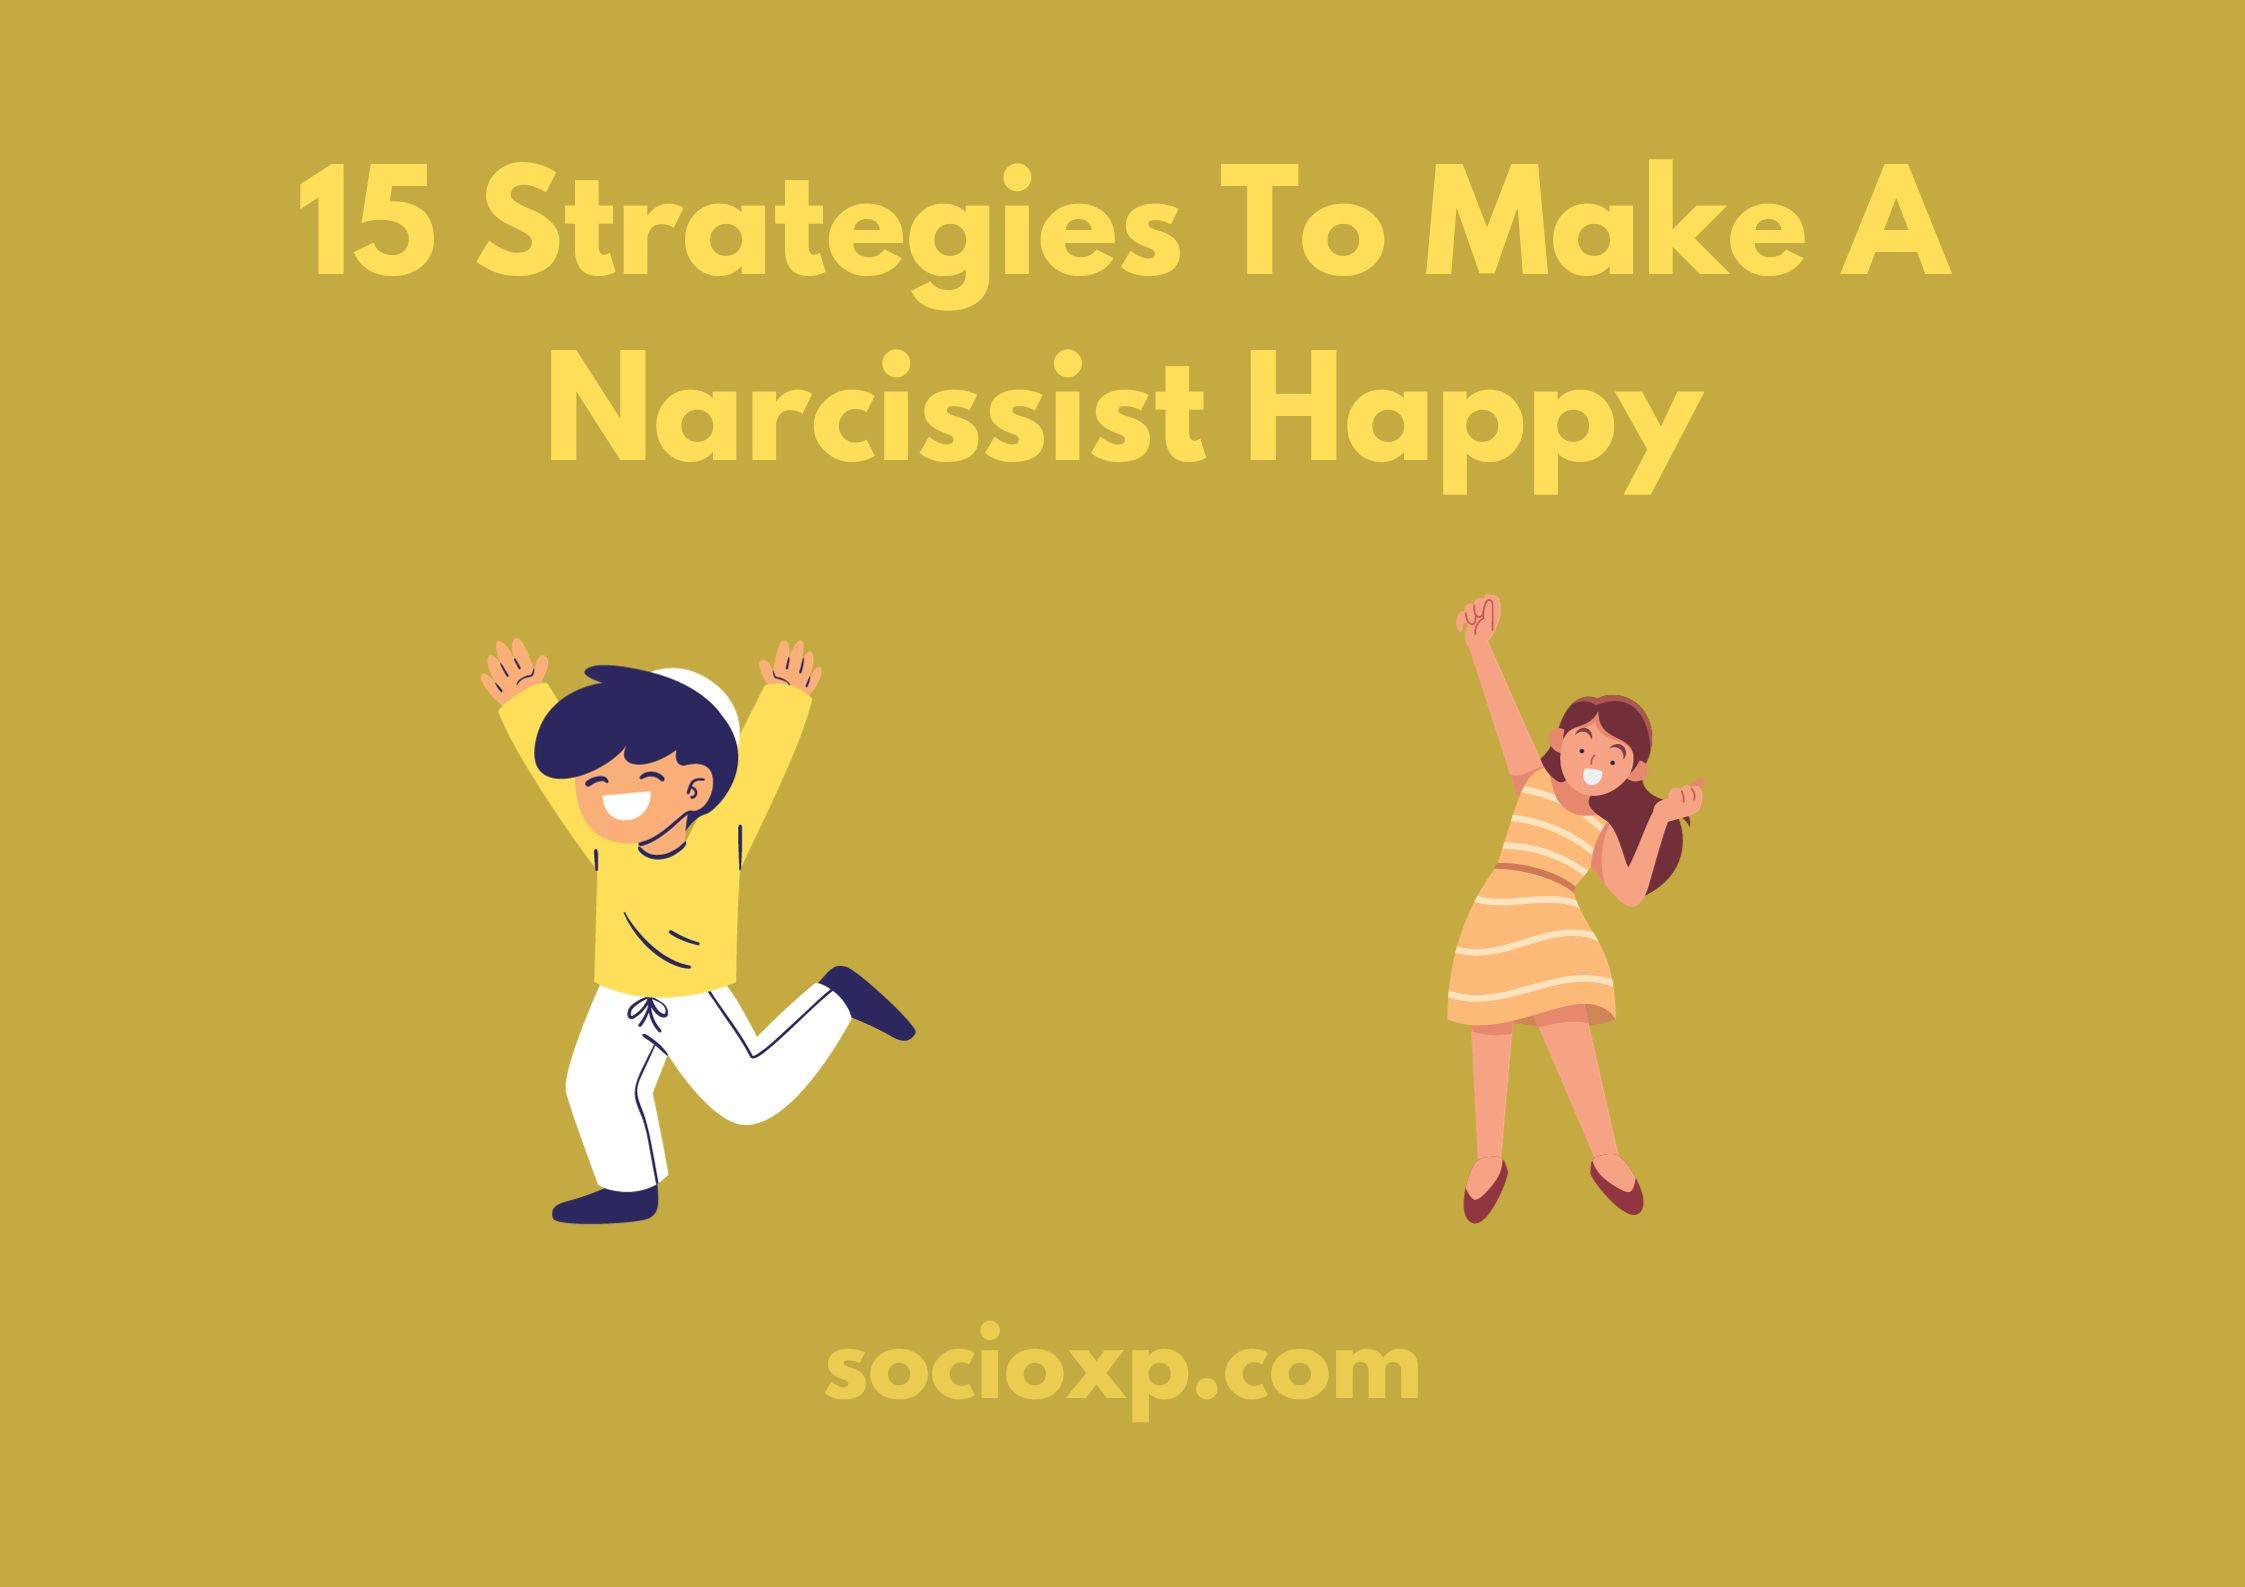 15 Strategies To Make A Narcissist Happy